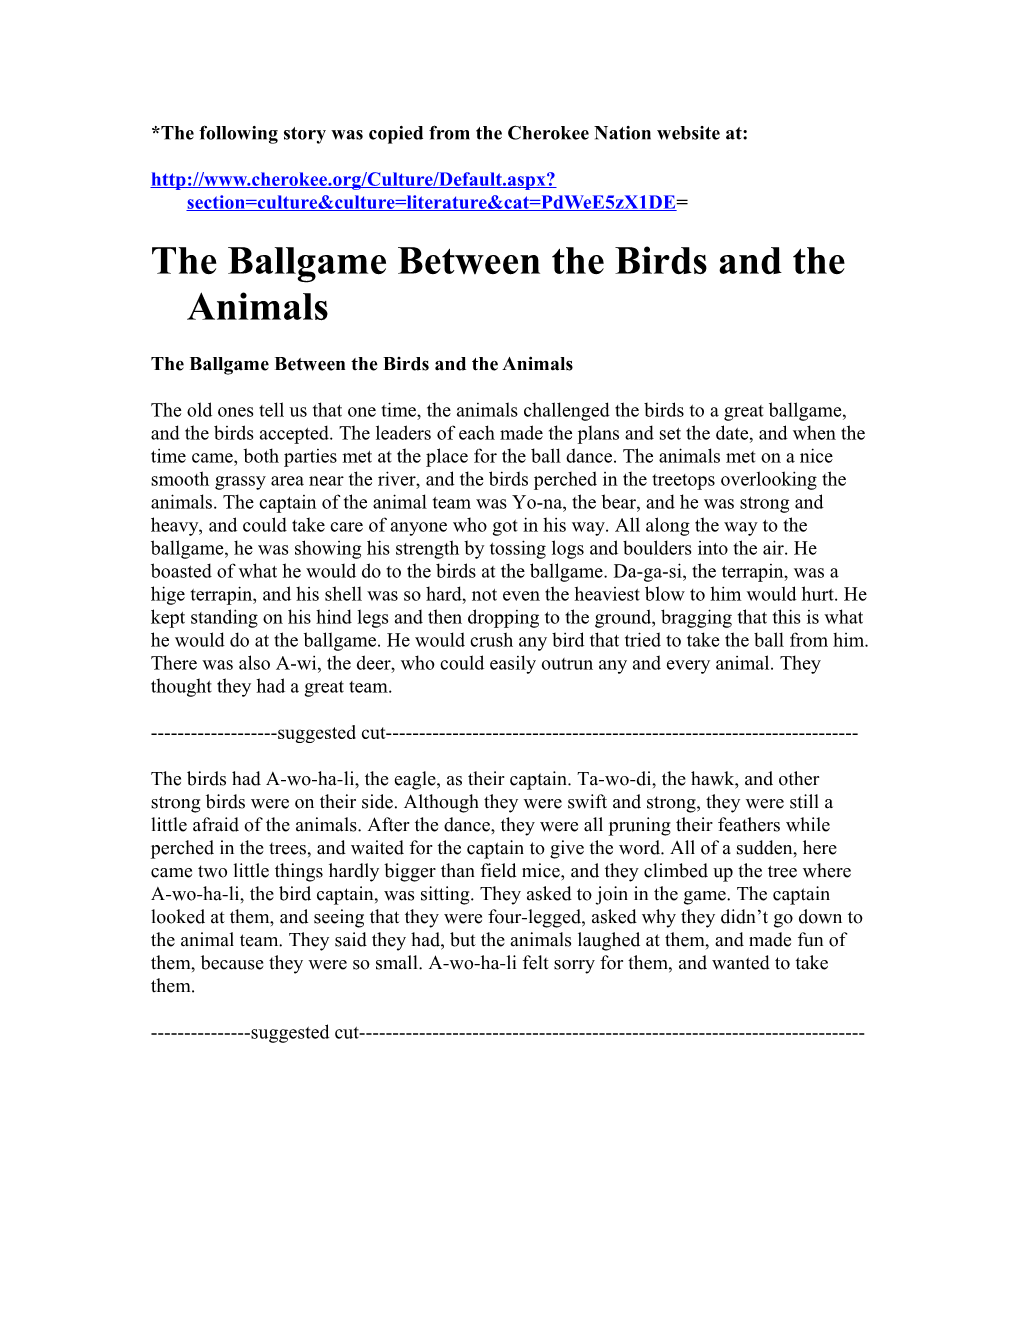 The Ballgame Between the Birds and the Animals